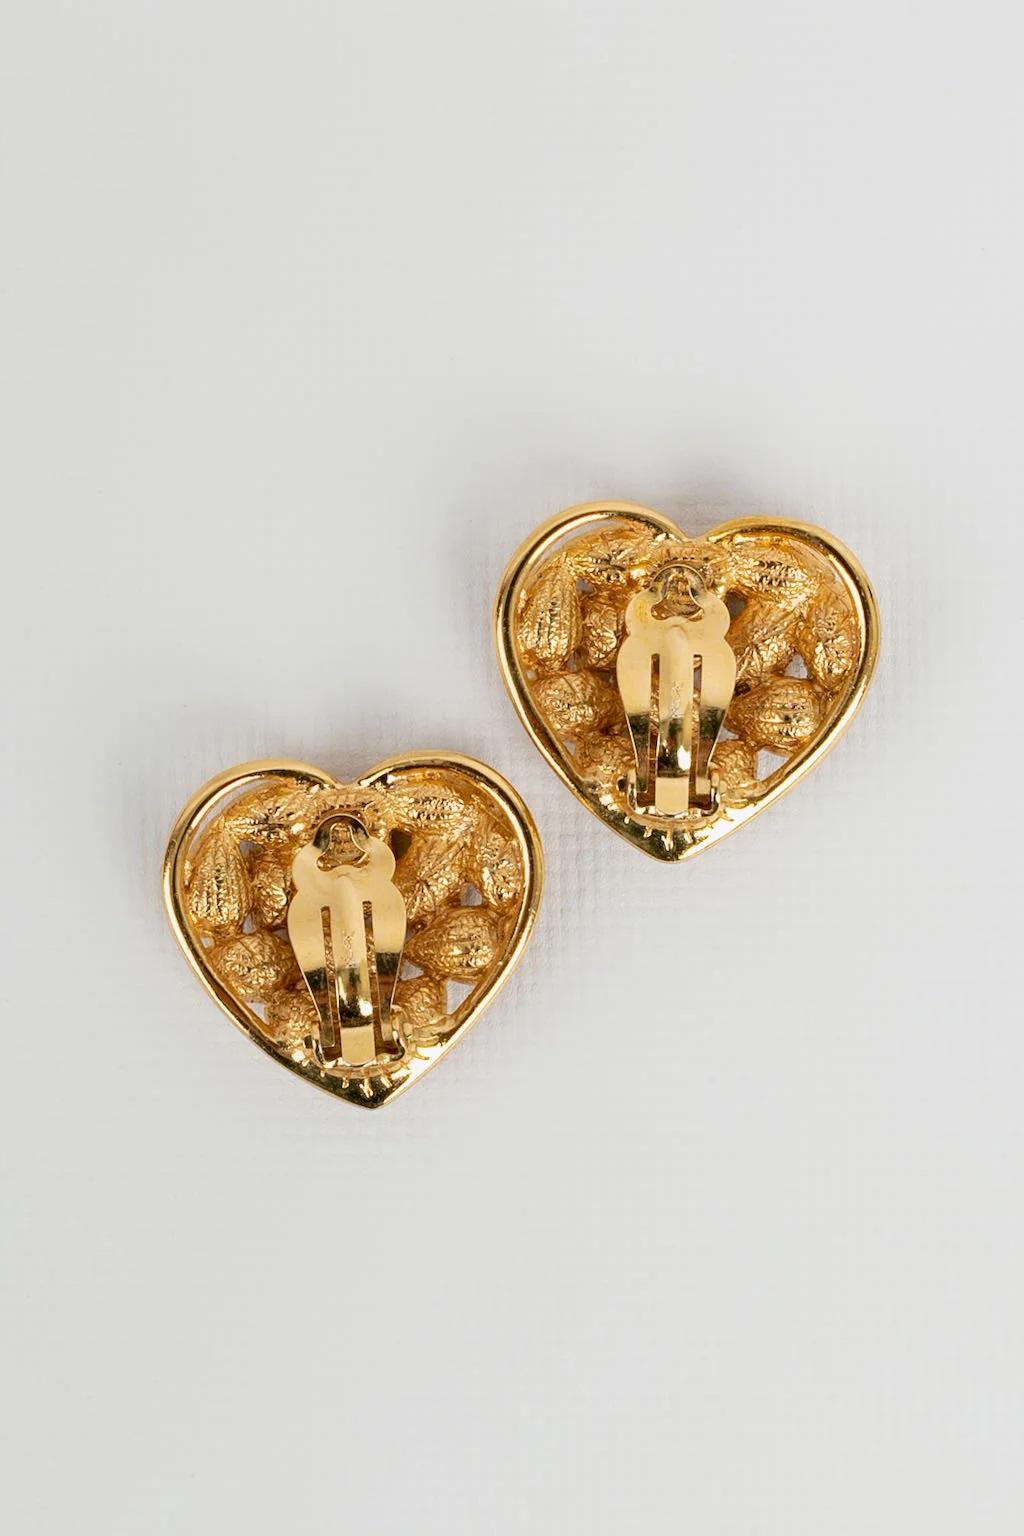 Yves Saint Laurent - (Made in France) Gold-plated clip earrings featuring a heart paved with rhinestones.

Additional information:
Dimensions: 3 W x 3.2 cm
Condition: Very good condition
Seller Ref number: BO19